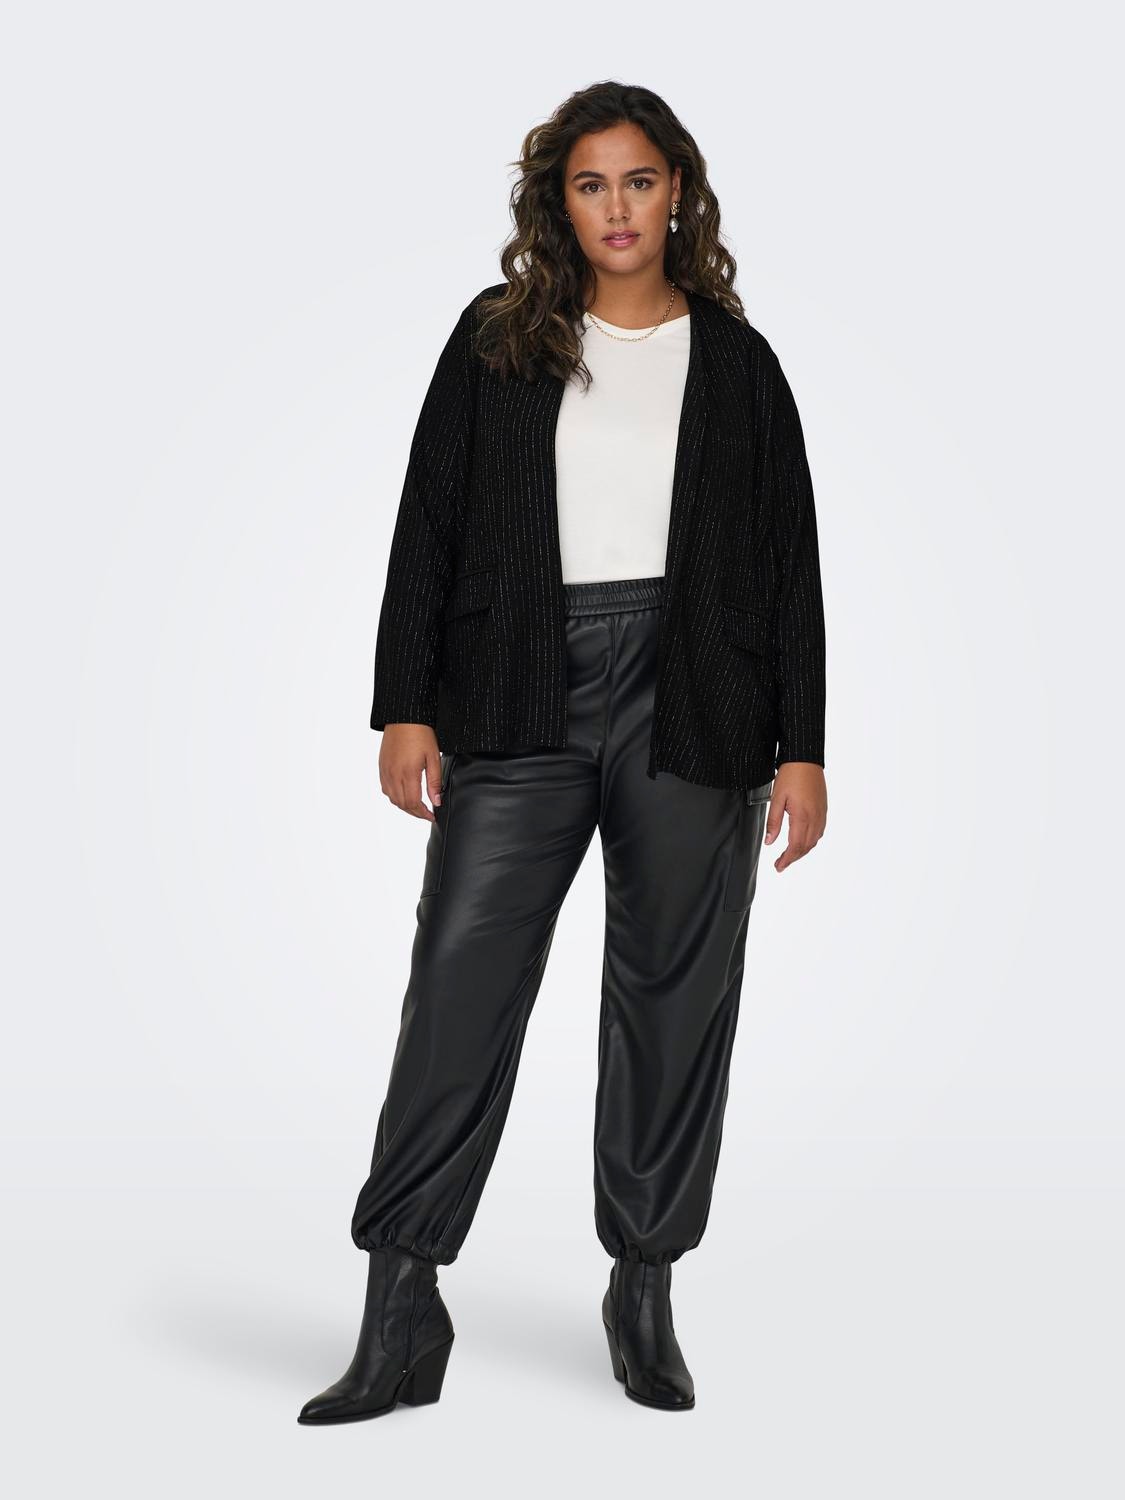 DEAR SPARKLE Plus-Sized Clothing On Sale Up To 90% Off Retail